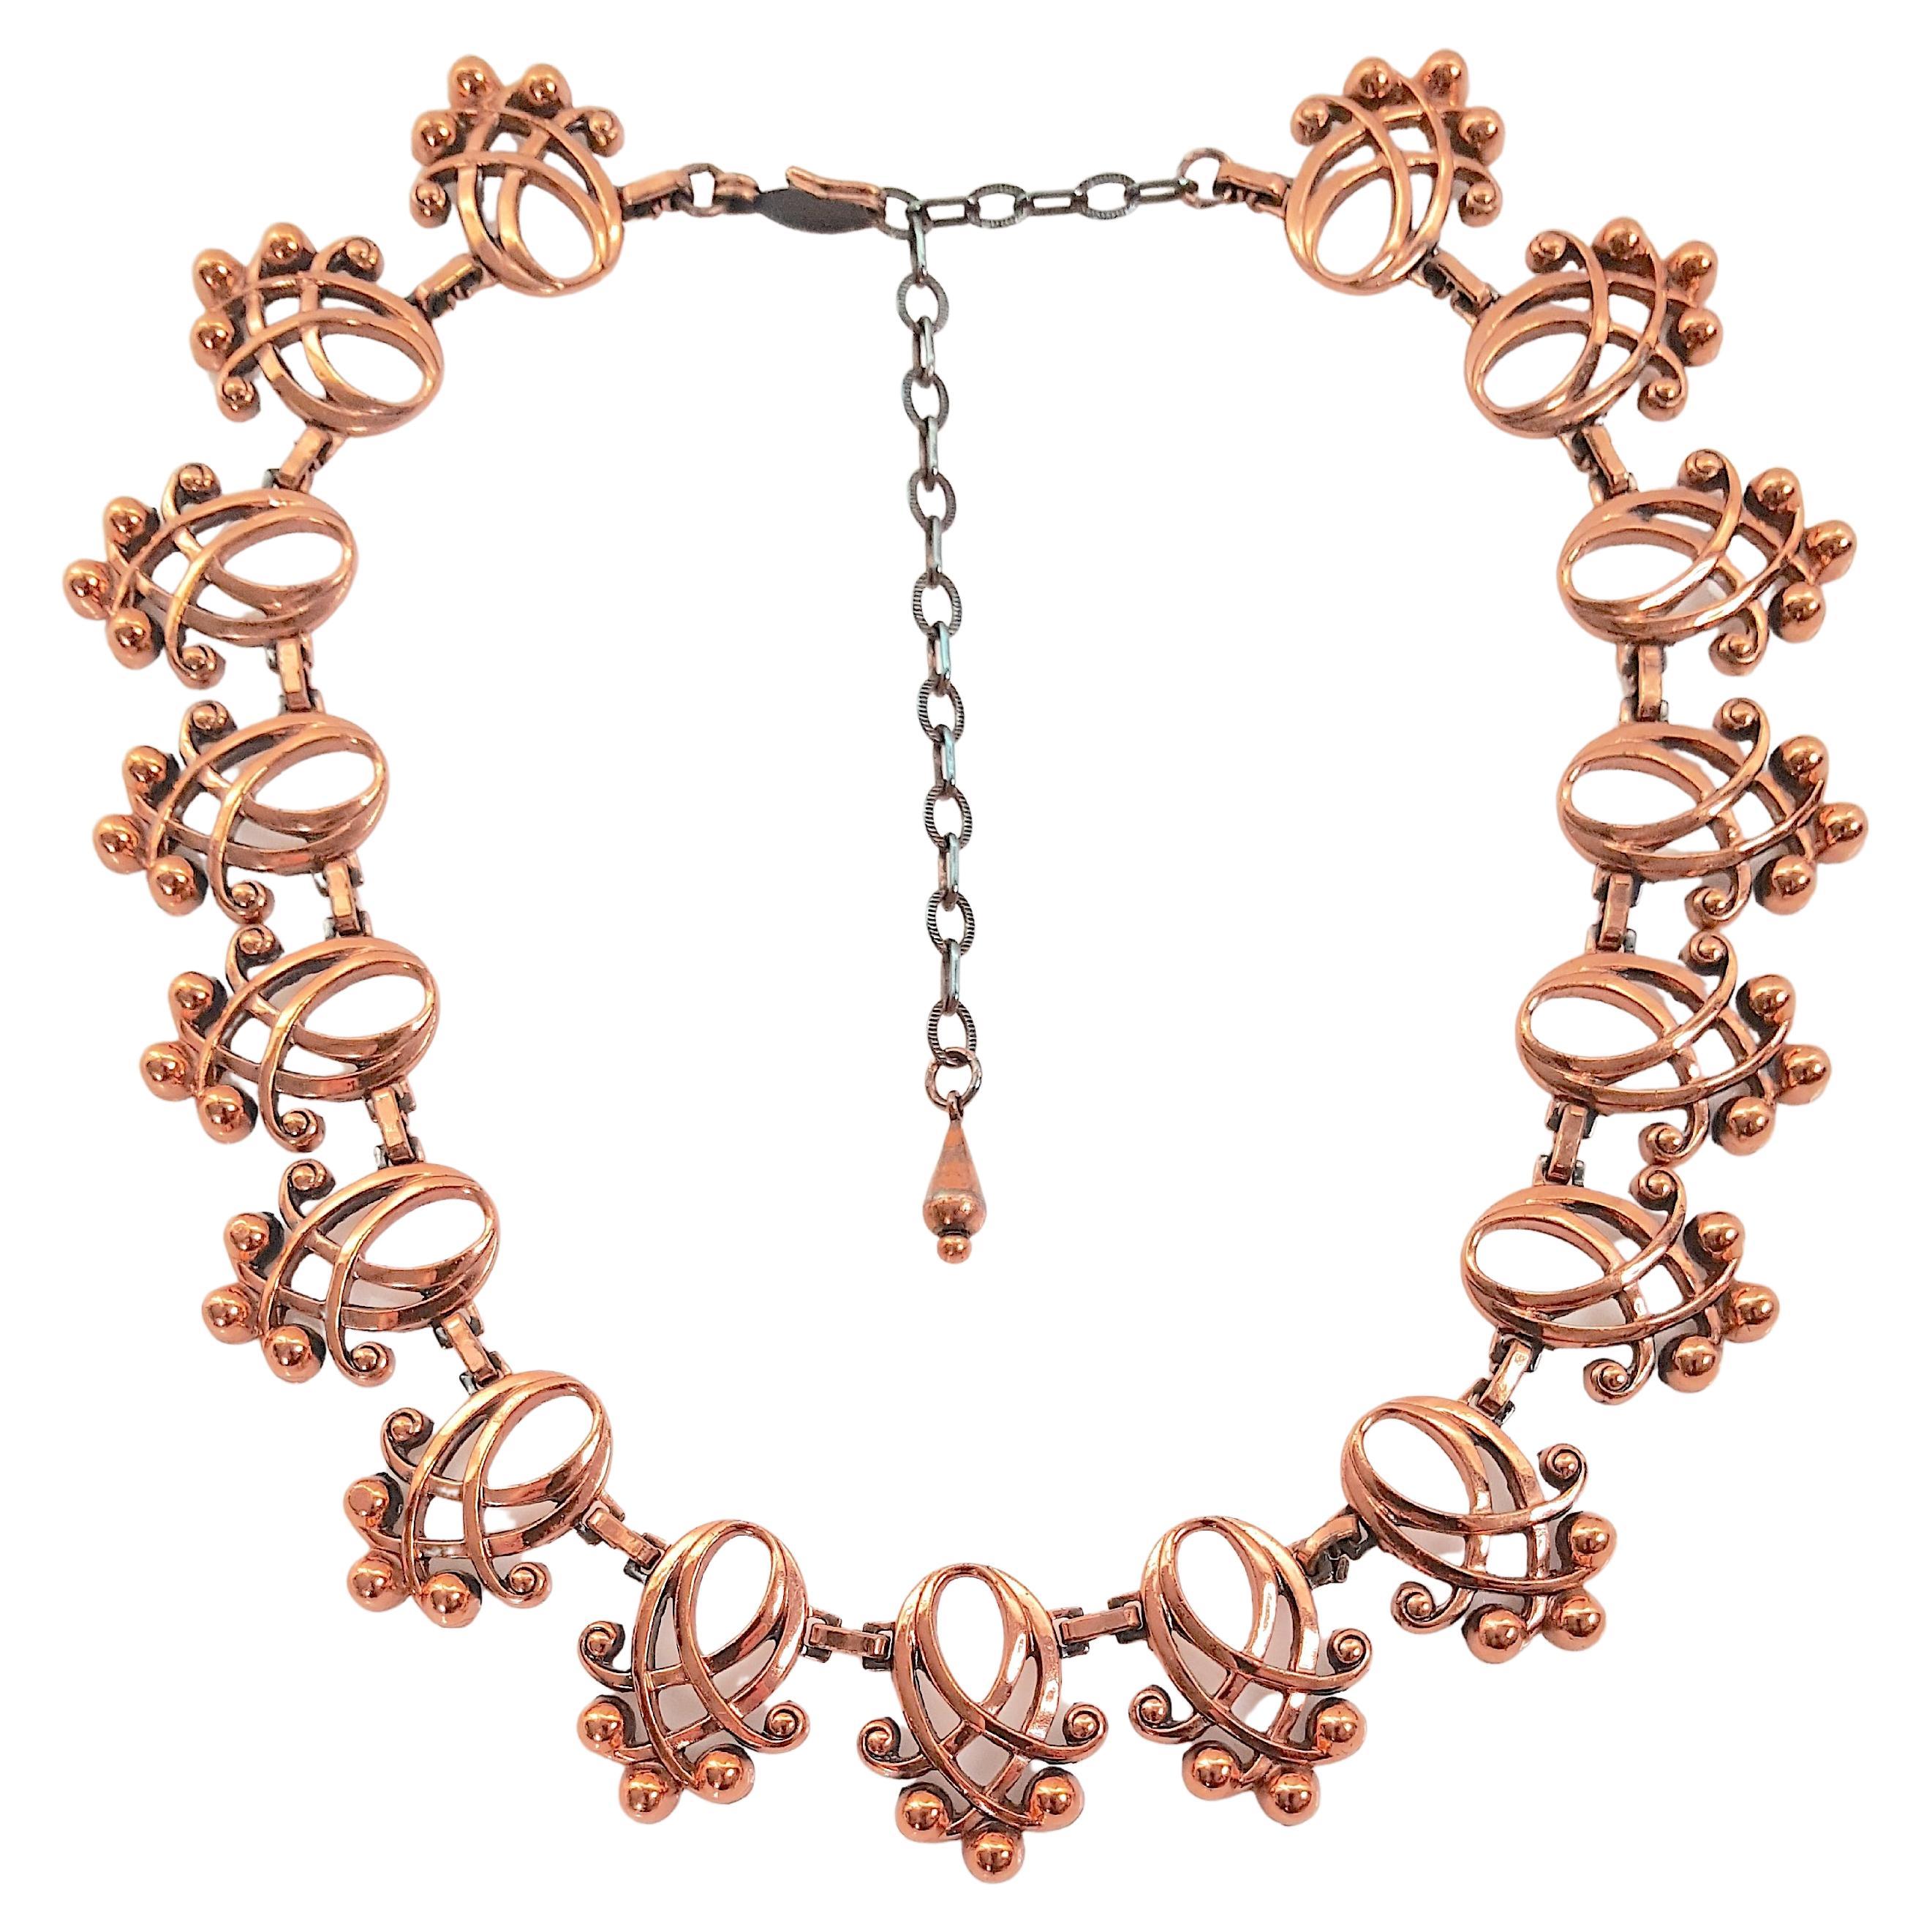 With organically-shaped copper openwork links recalling the rhythmic motifs of American architect Louis Sullivan from the Art-Nouveau period, this Renoir mid-century curvilinear 17-link necklace is signed on the hook of its clasp. An extension chain